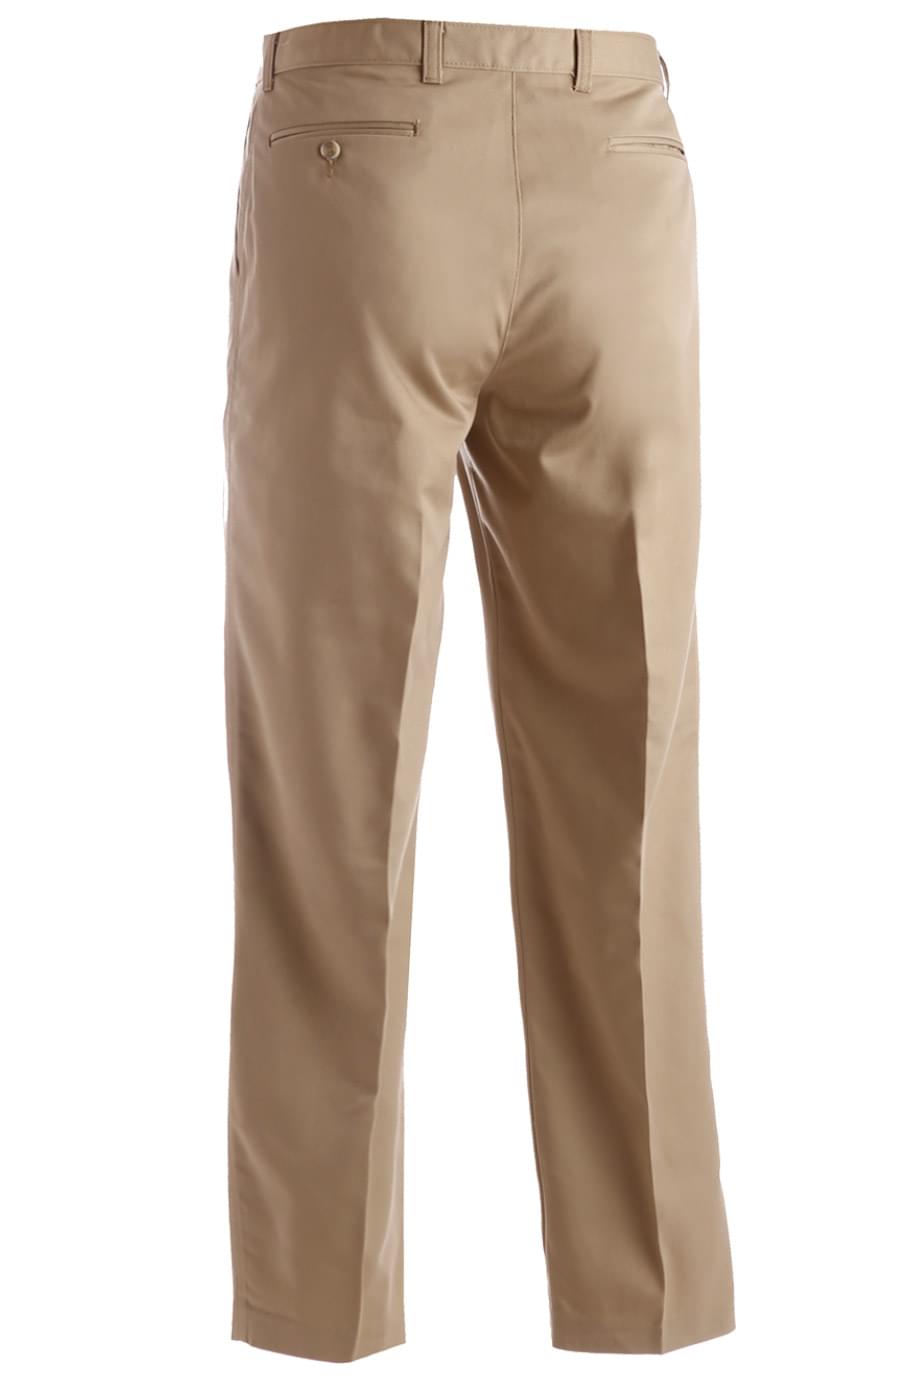 edwards MICROFIBER PLEATED FRONT DRESS PANT